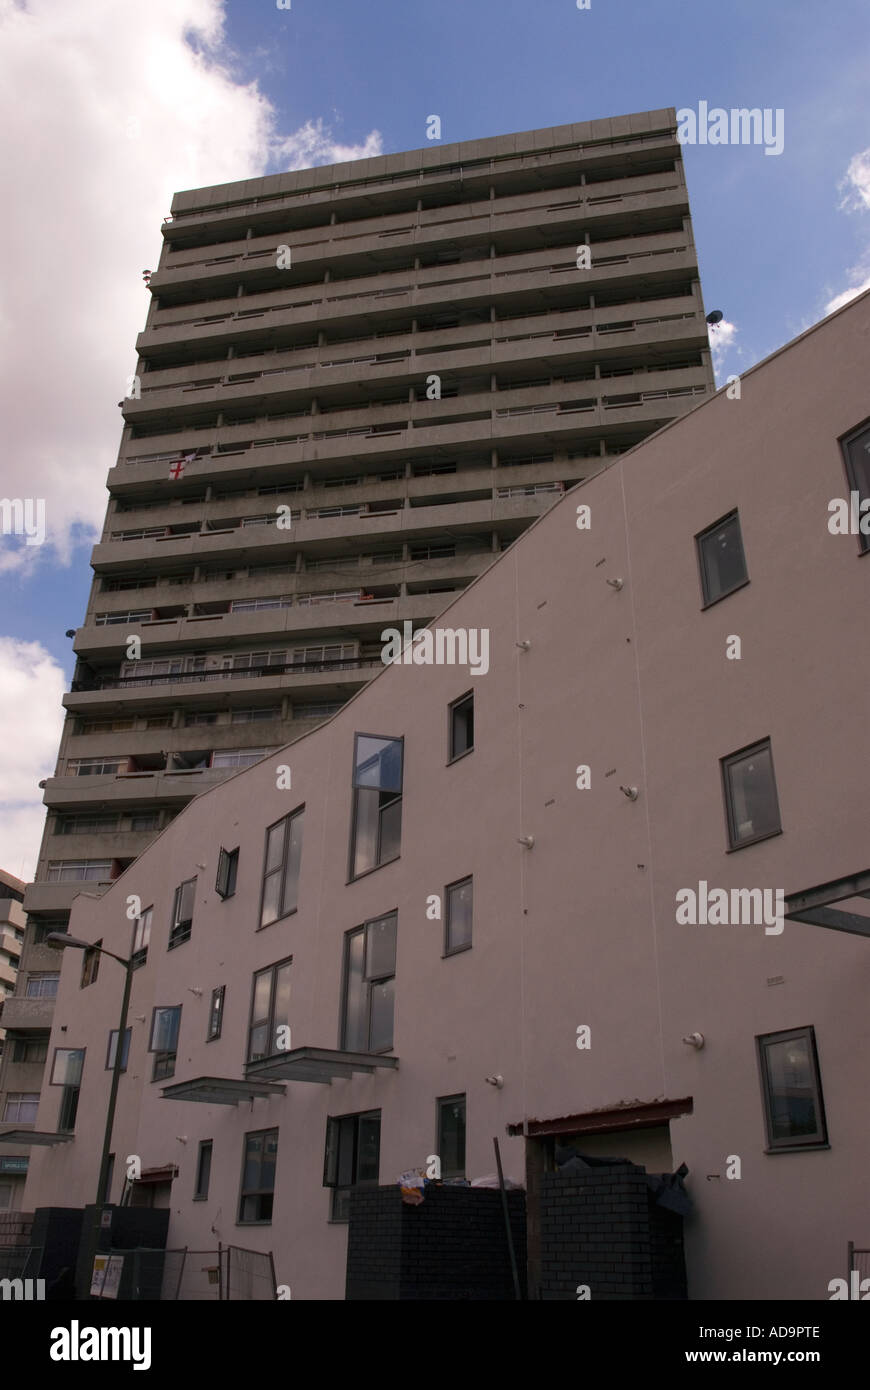 New housing development dwarfed by old style council tower block London UK Stock Photo